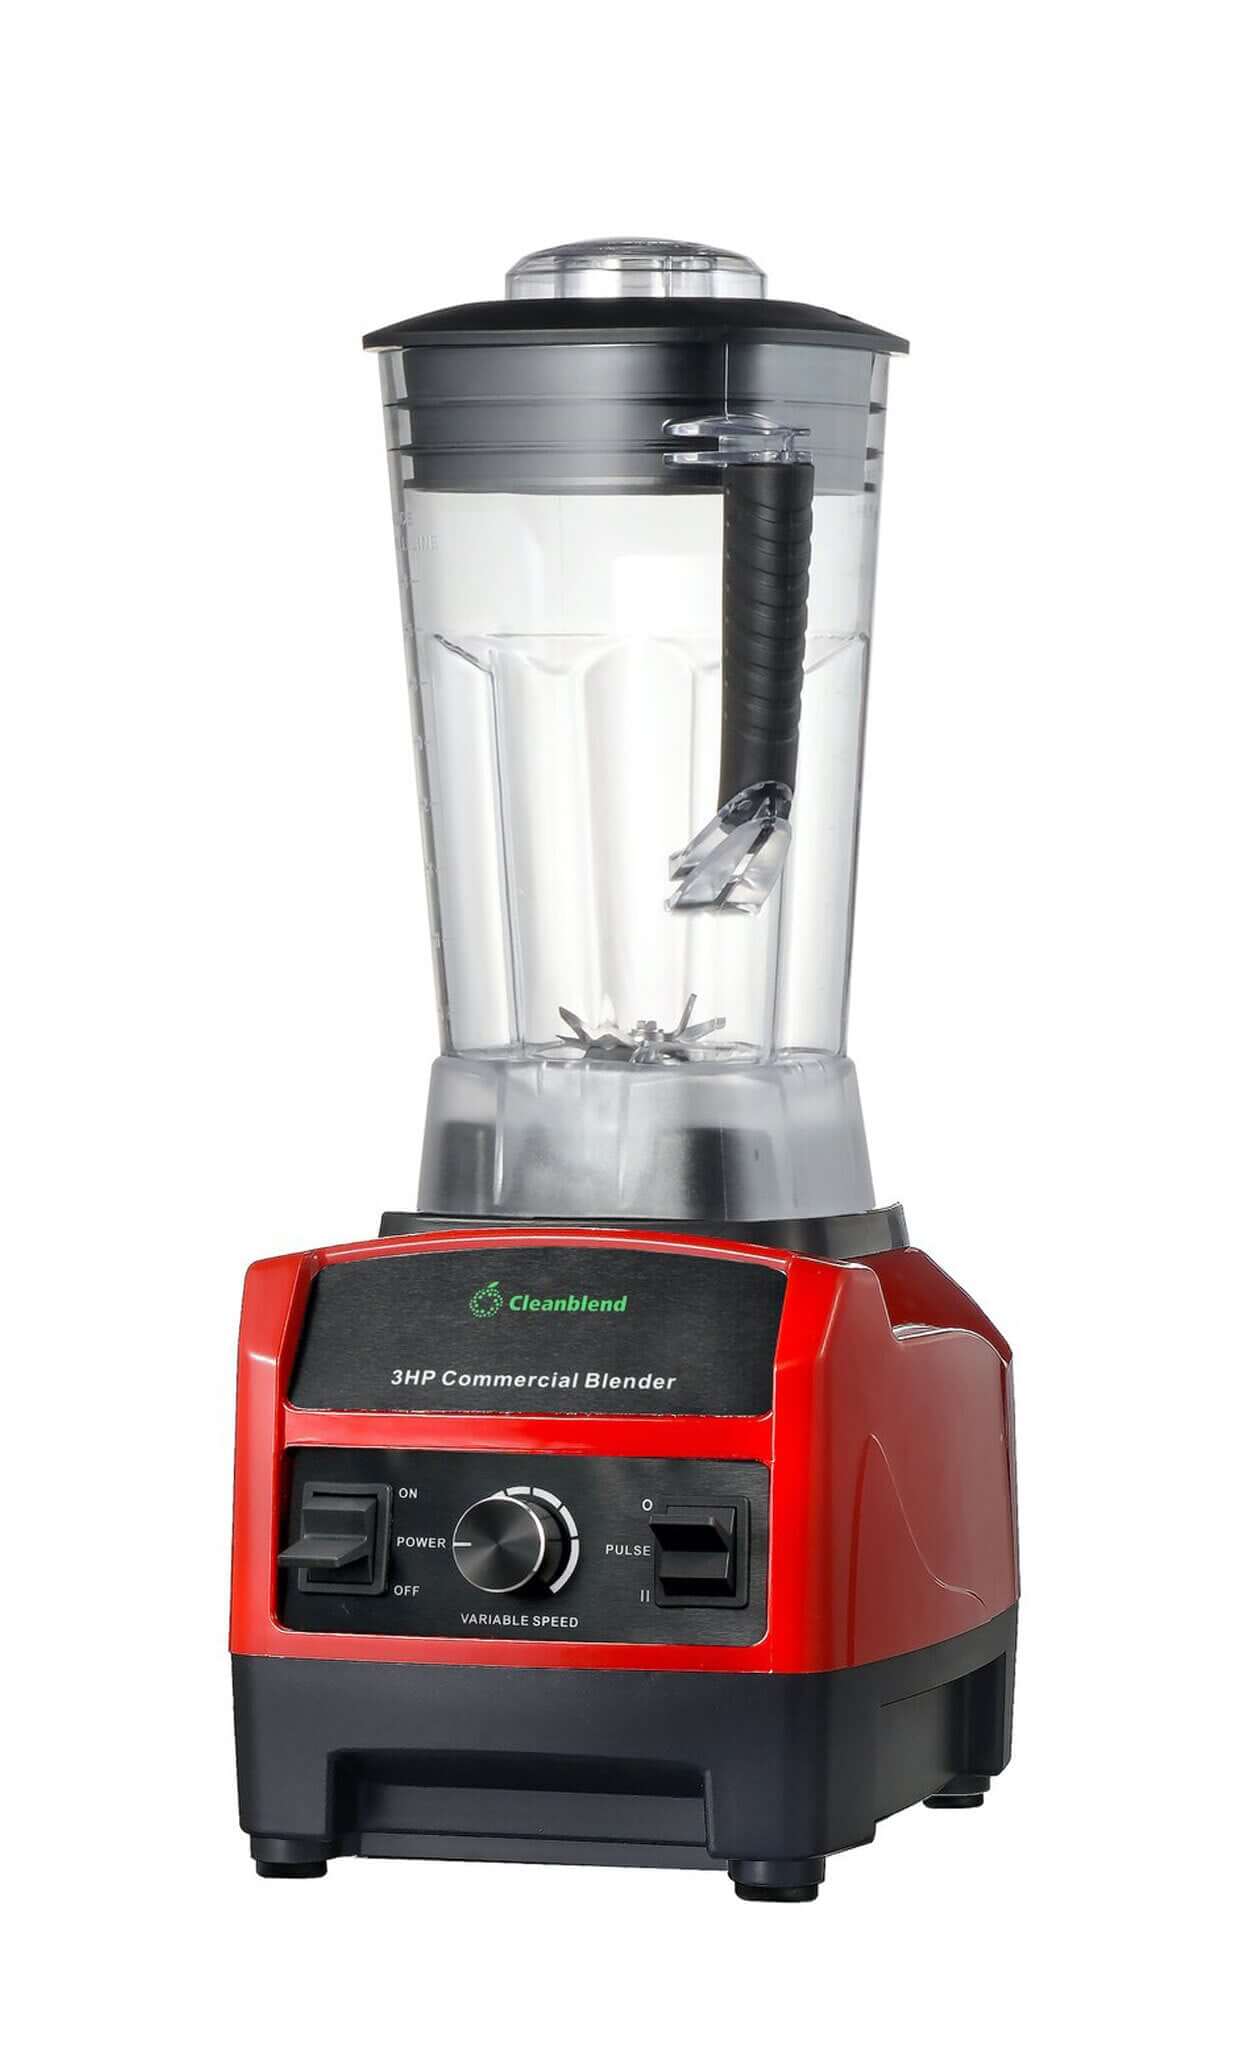 Cleanblend Commercial Blender - 64oz Countertop Blender 1800 Watts - High  Performance, High Powered Professional Blender and Food Processor For  Smoothies